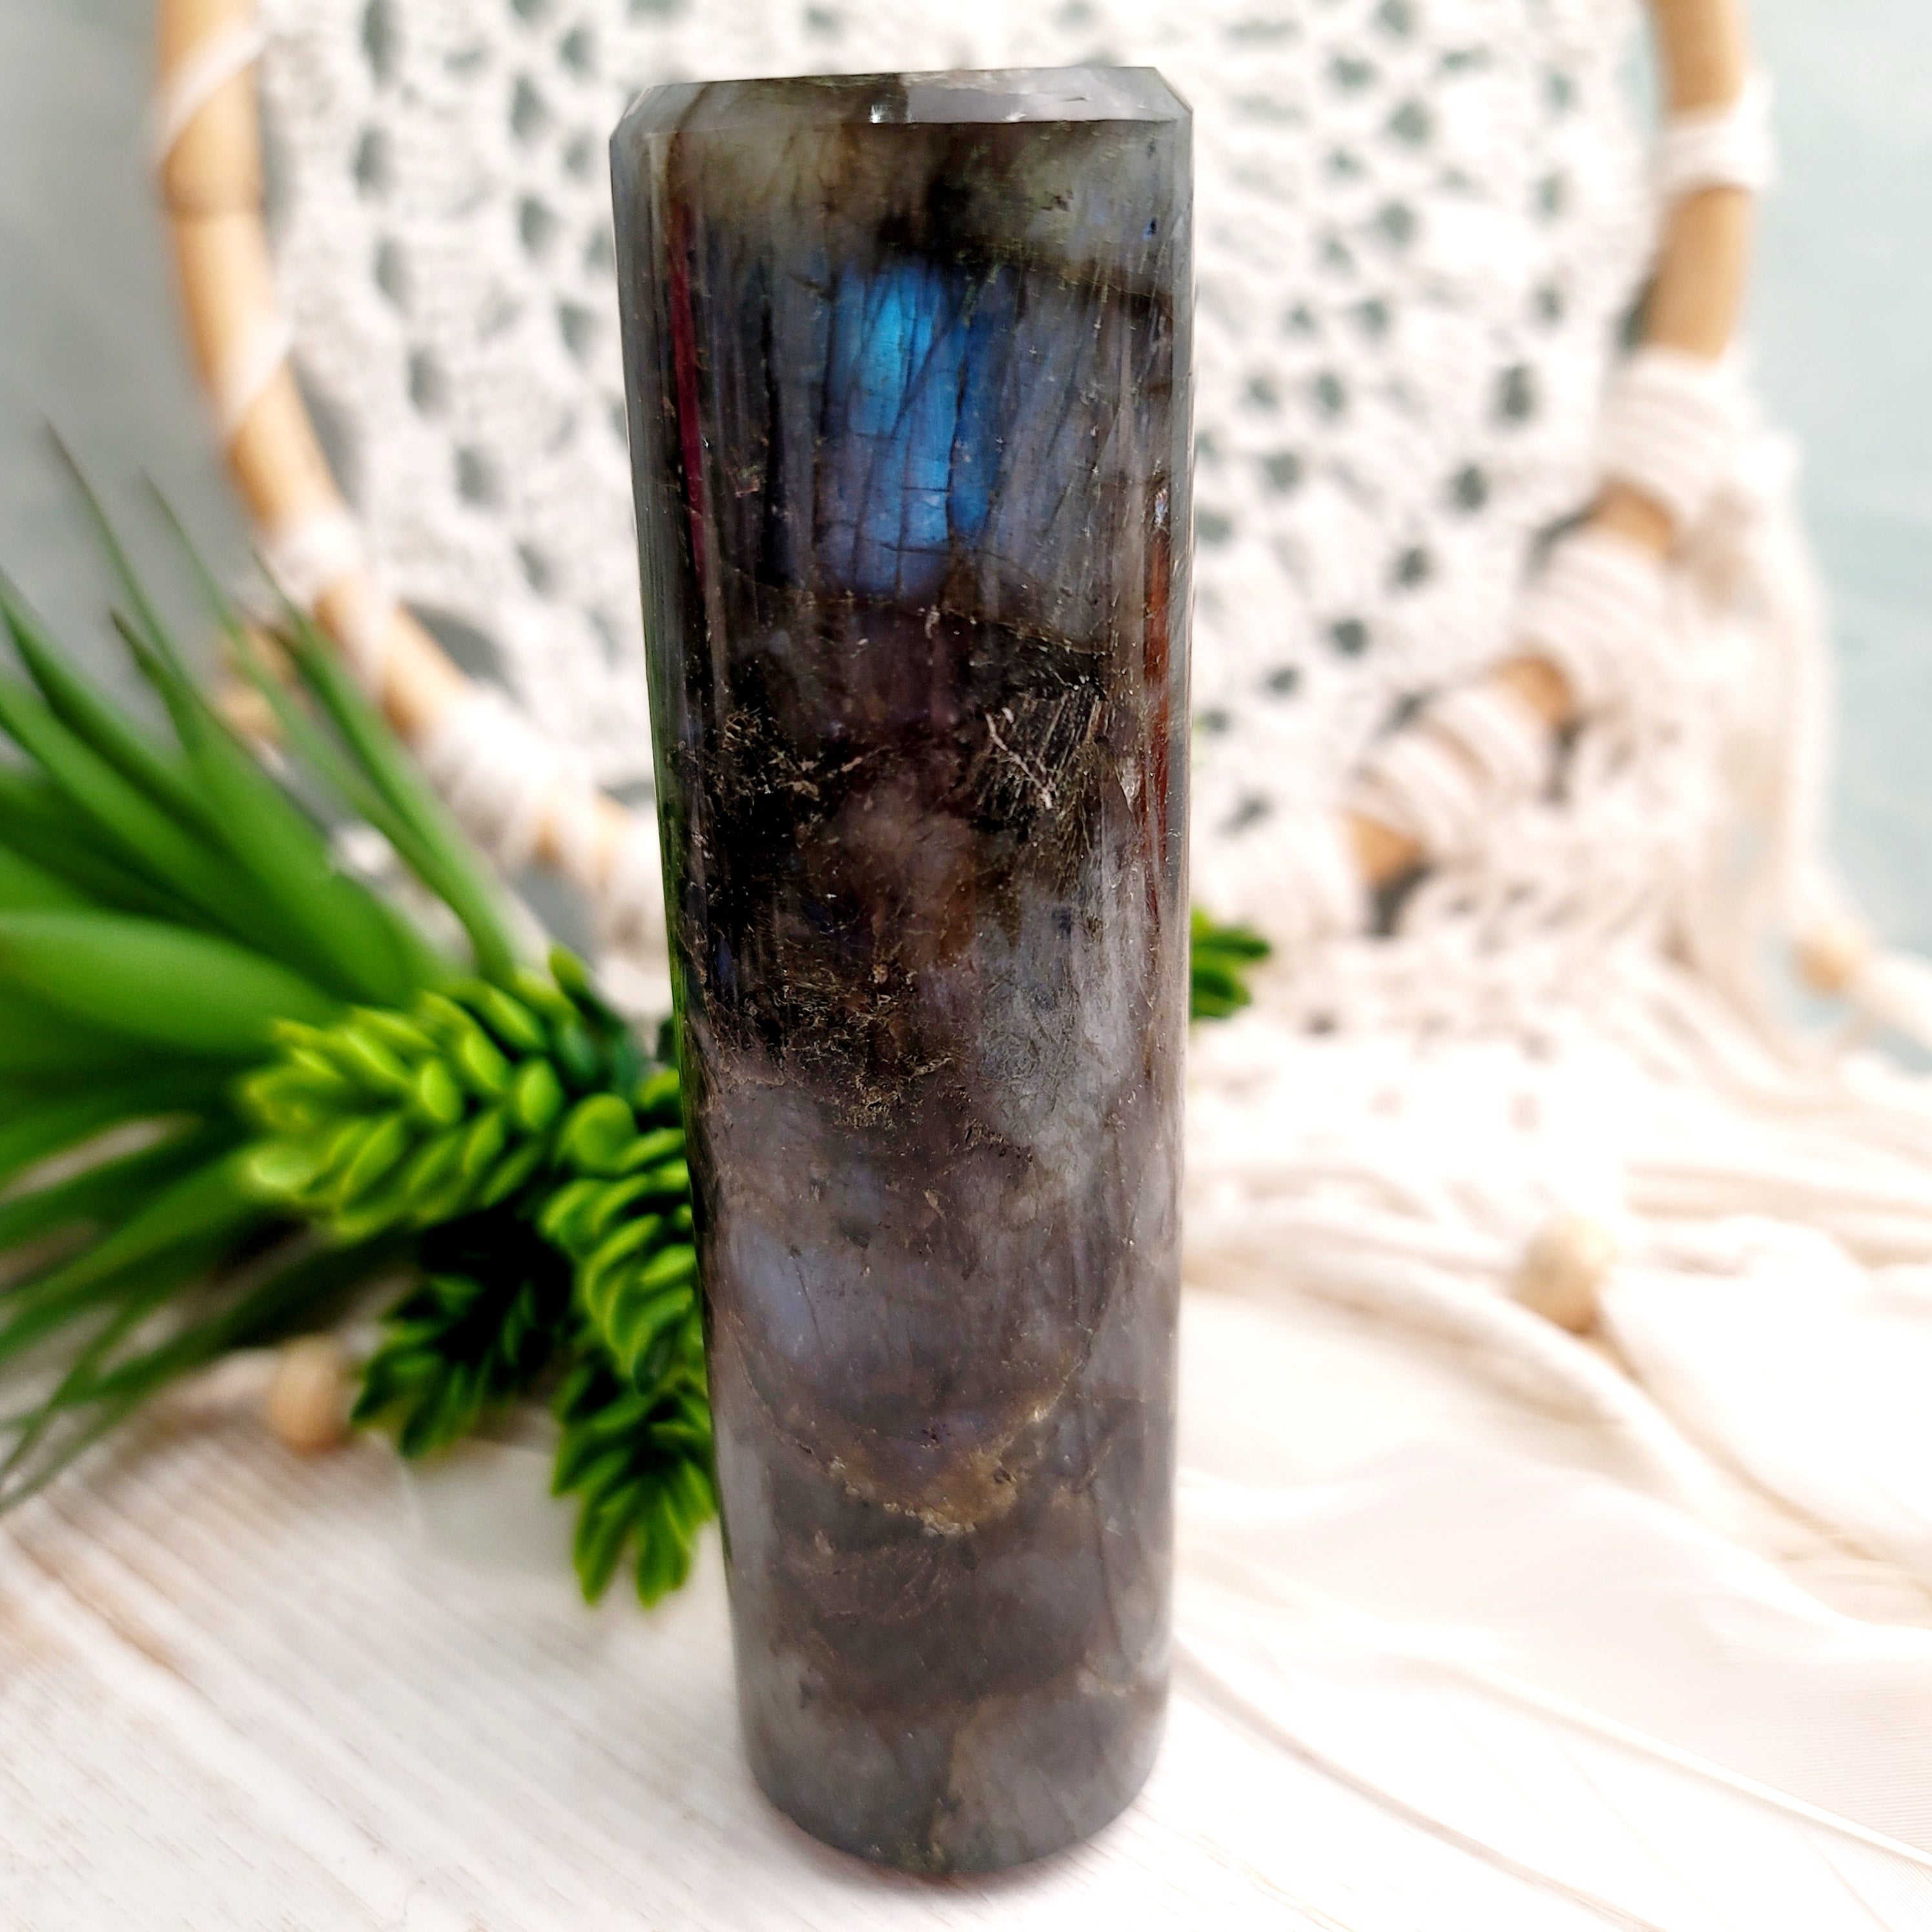 Labradorite Harmonizer for Finding your Path, Protection and Transforming your Life